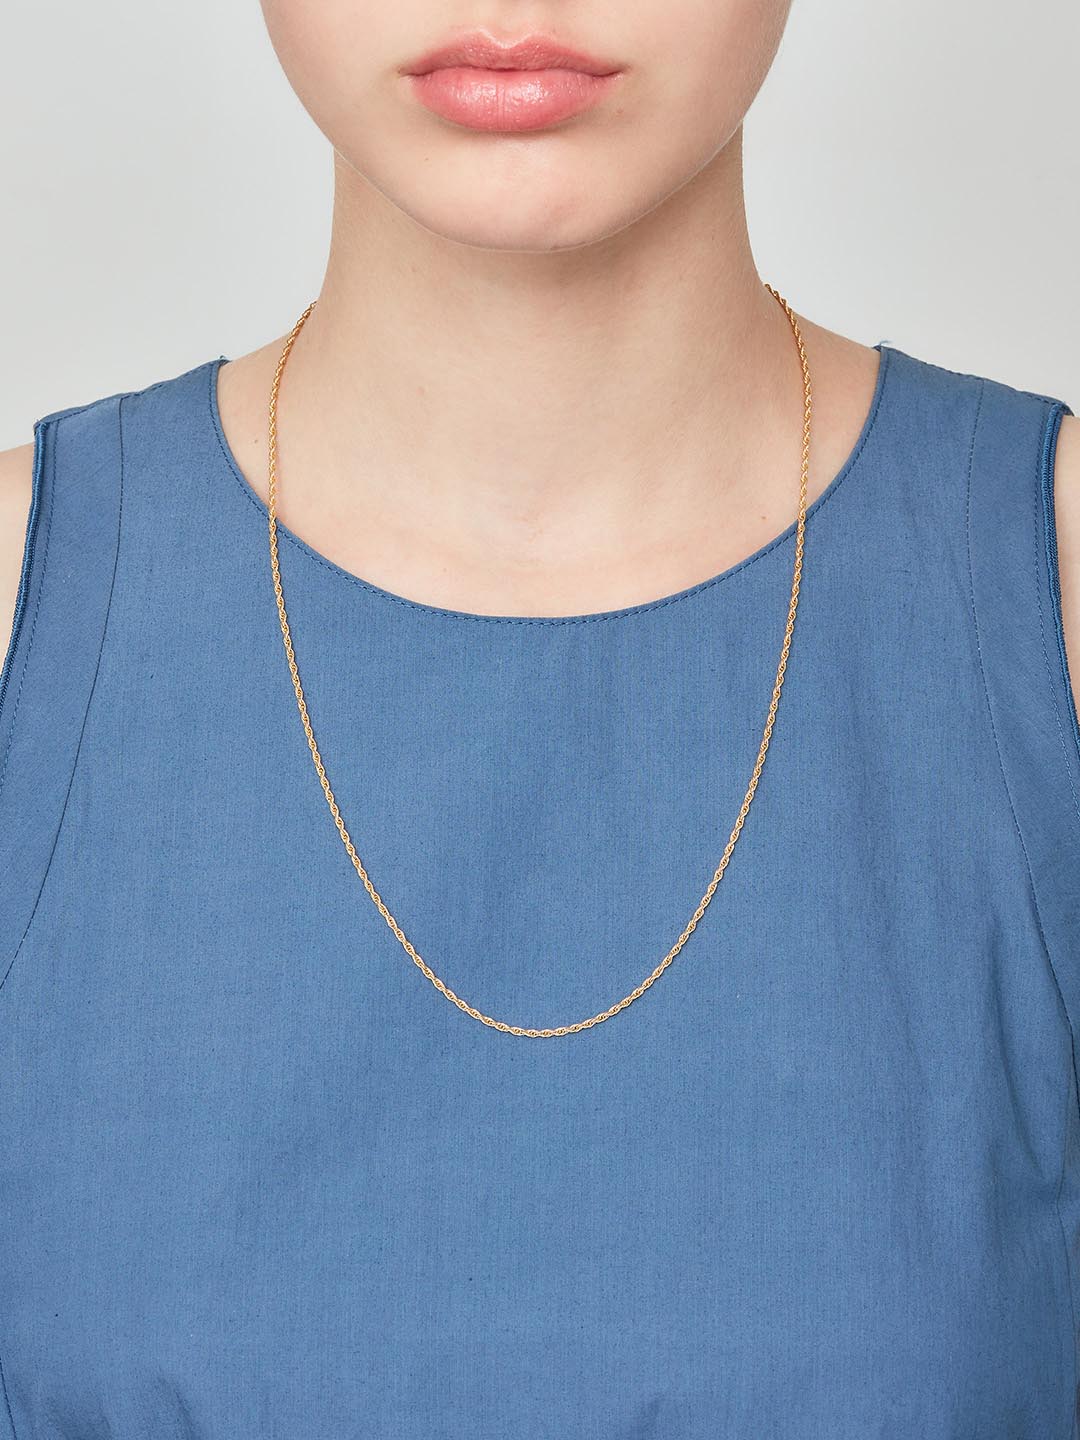 Sofia Necklace - Yellow Gold